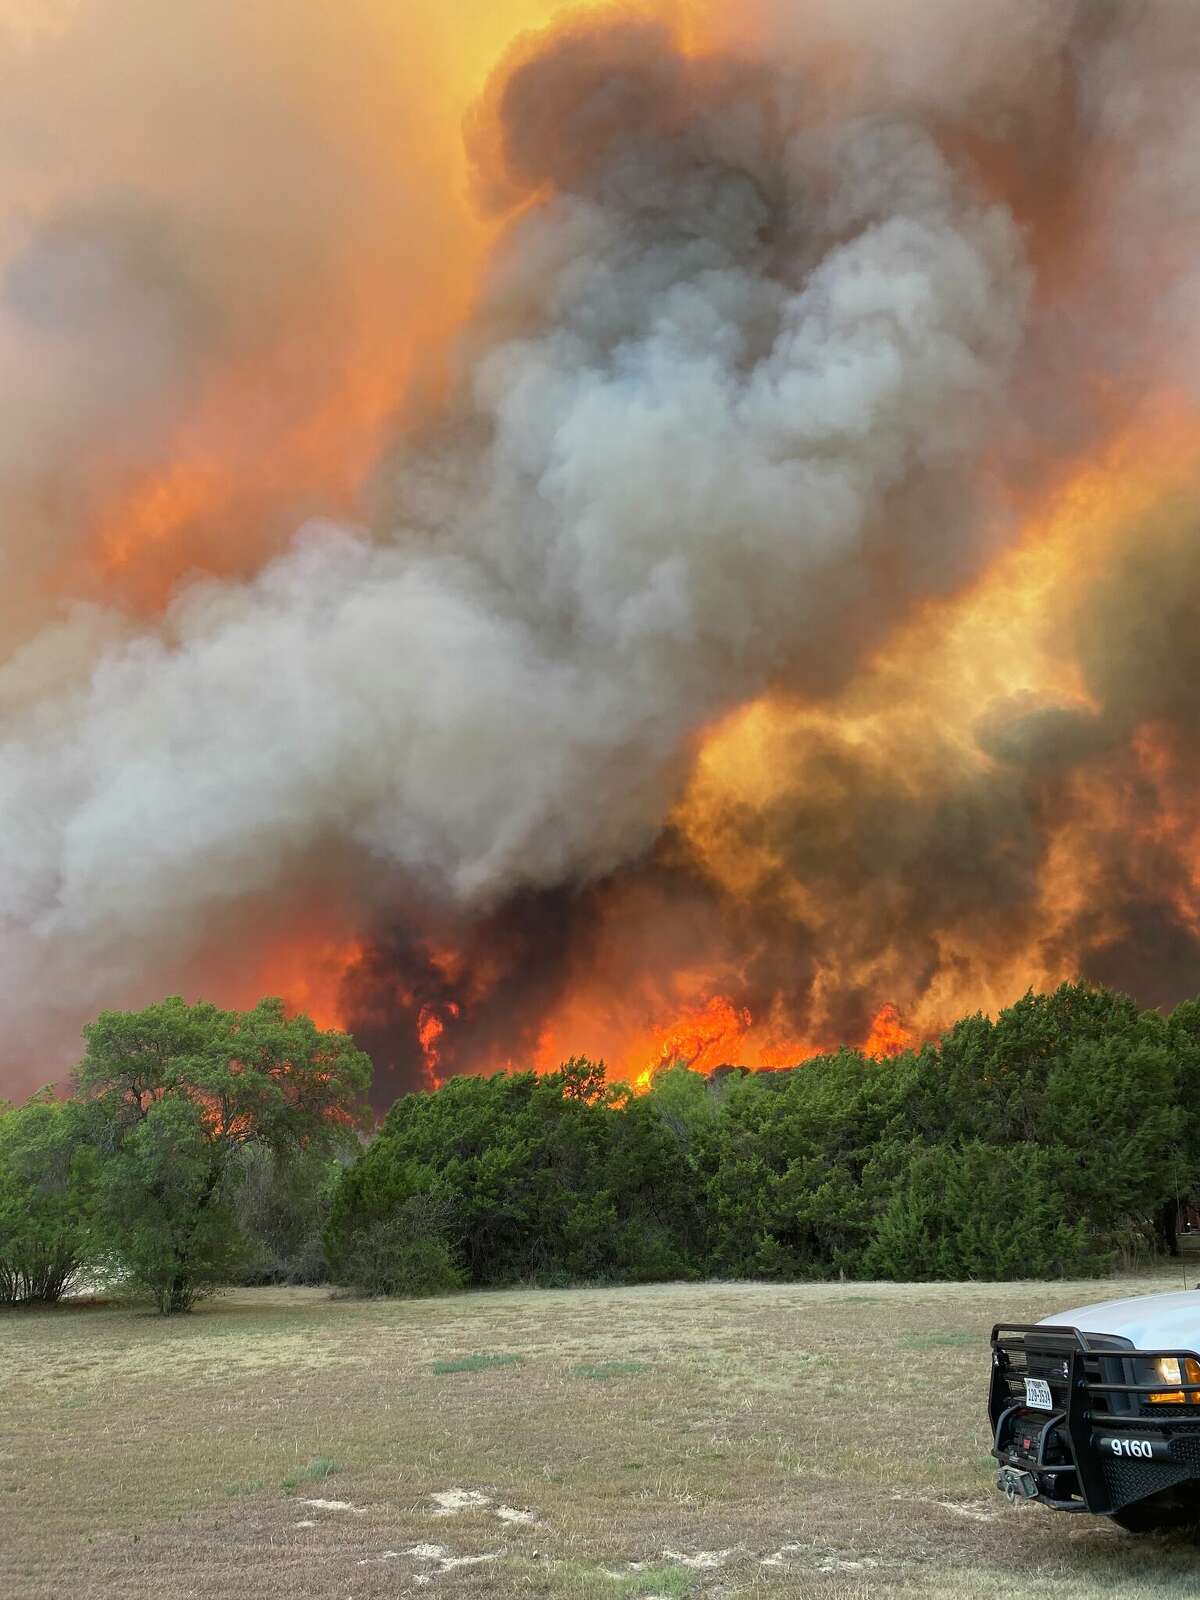 The Mesquite Heat Fire in Taylor County is an estimated 5,000 acres and 5% is contained, according to a from the Texas A&M Forest Service.